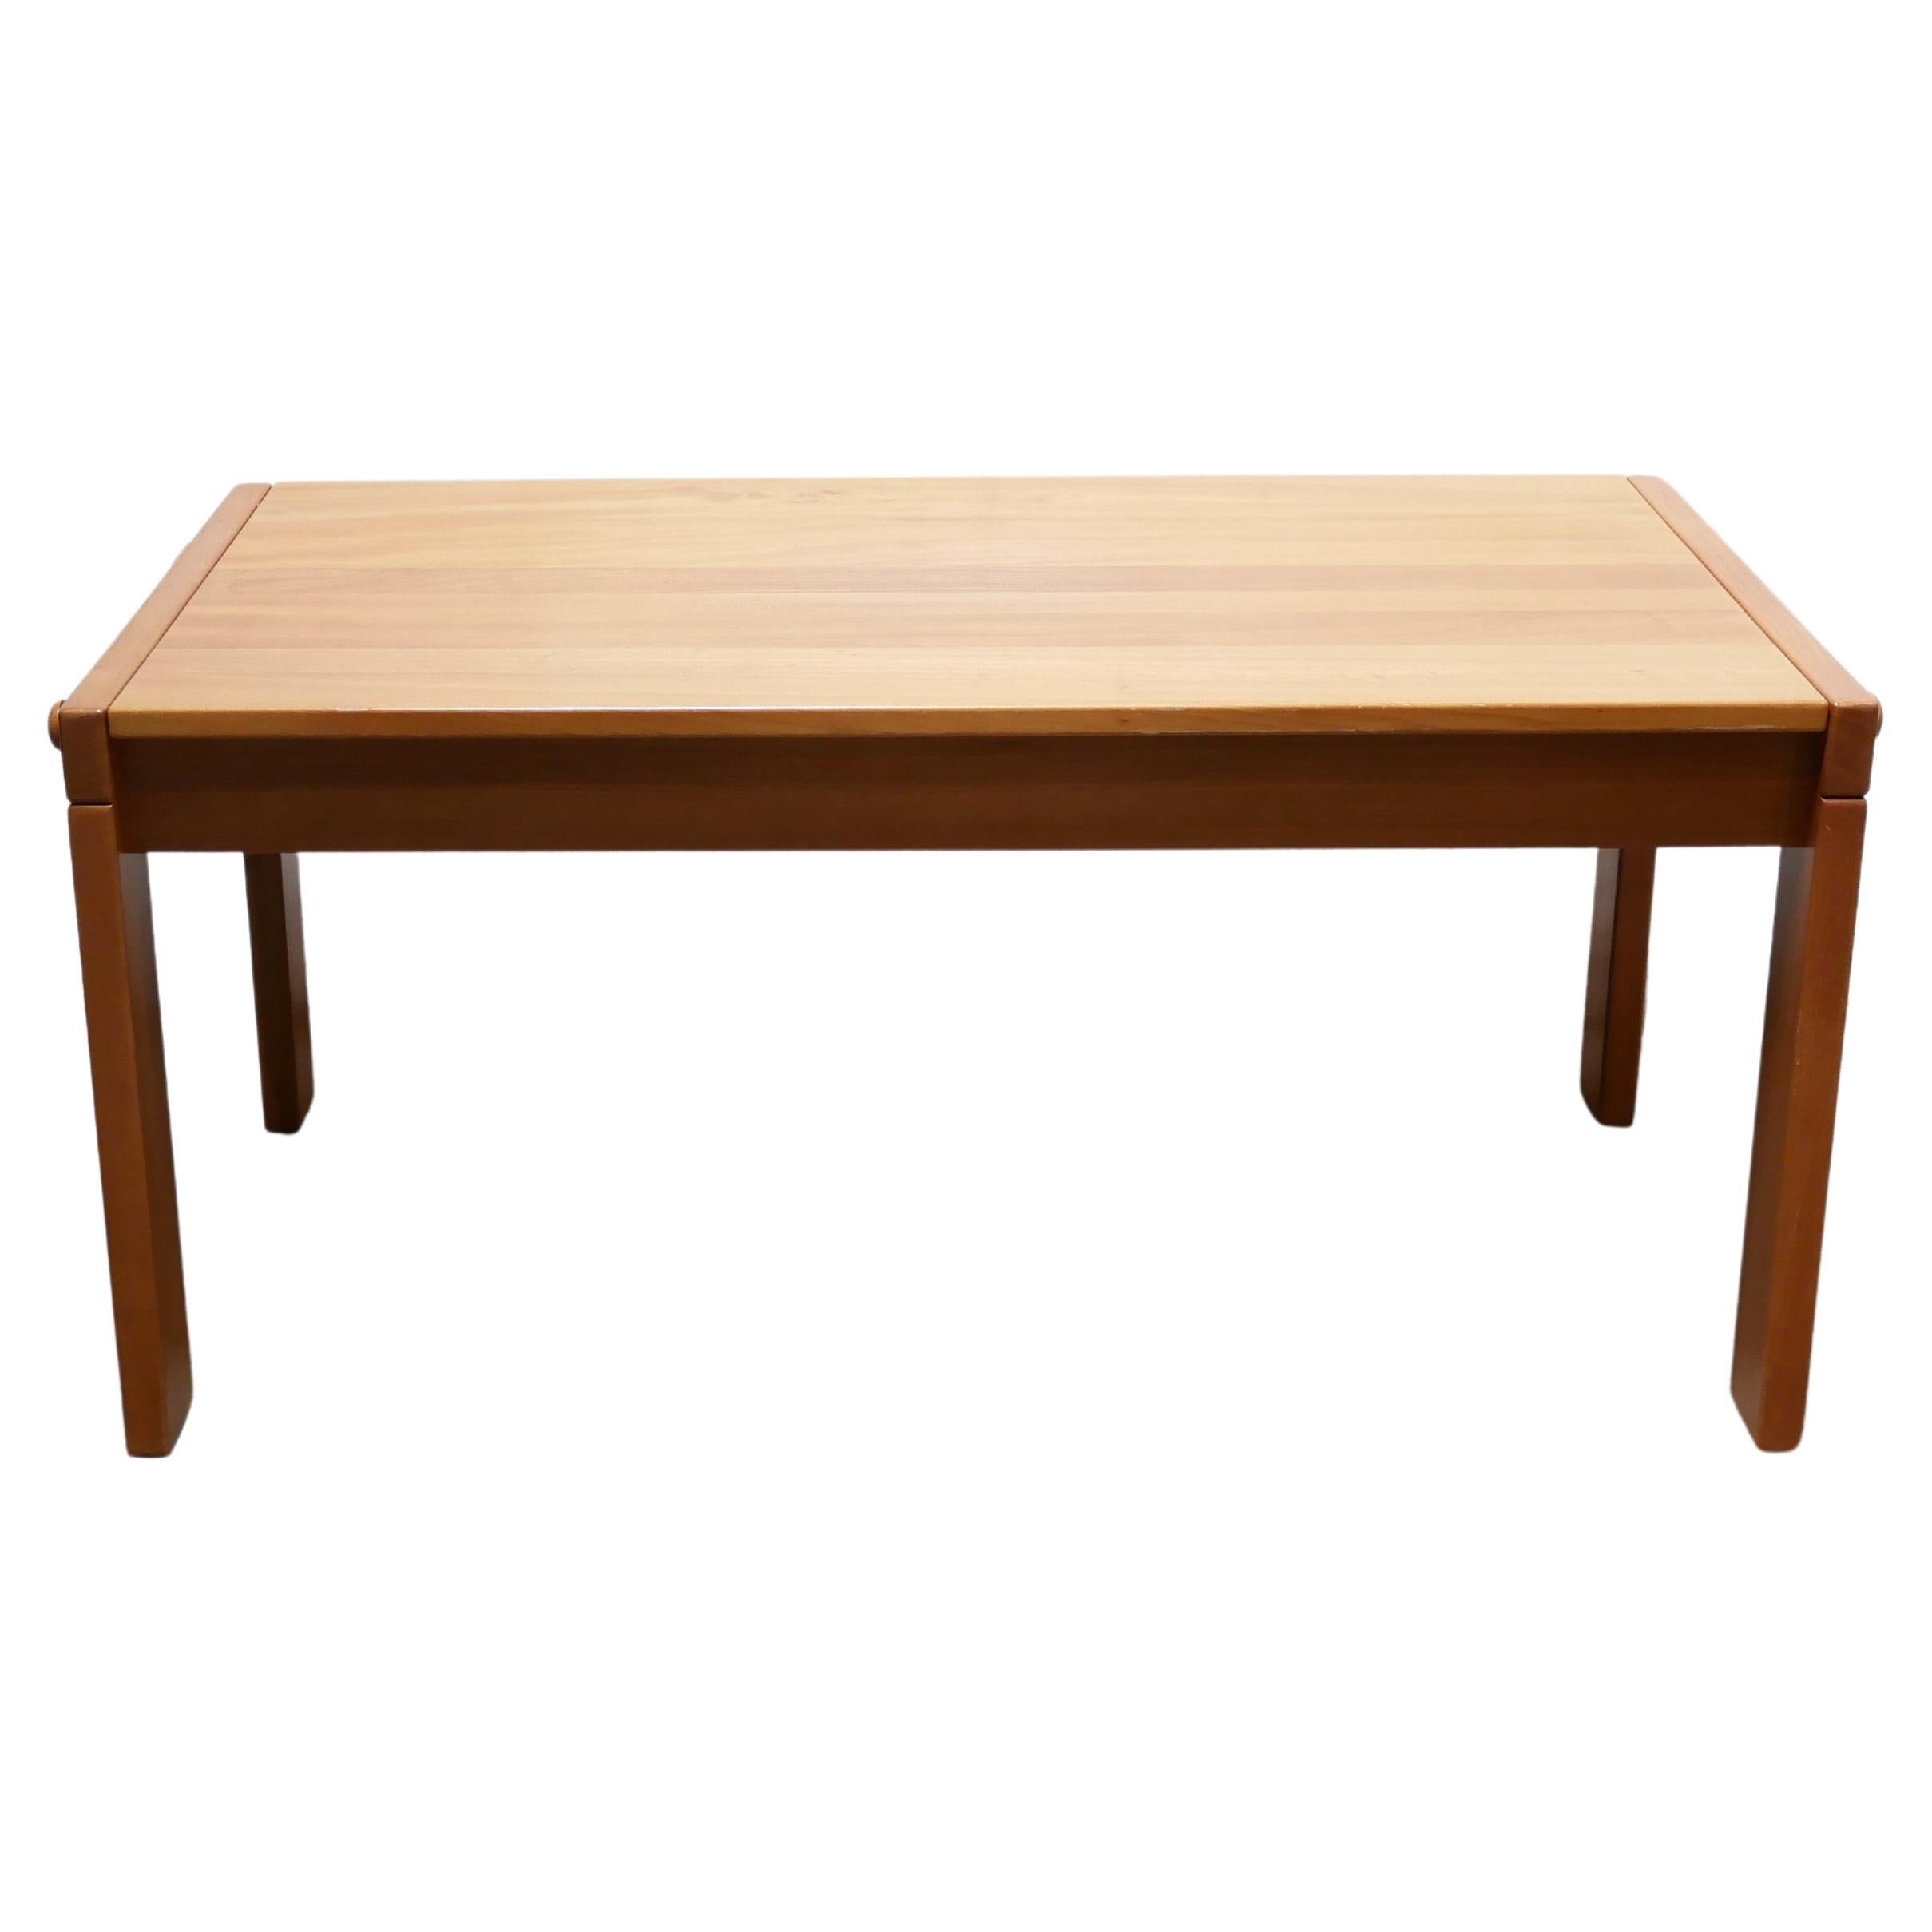 Vintage elm dining table by Maison Regain editions For Sale